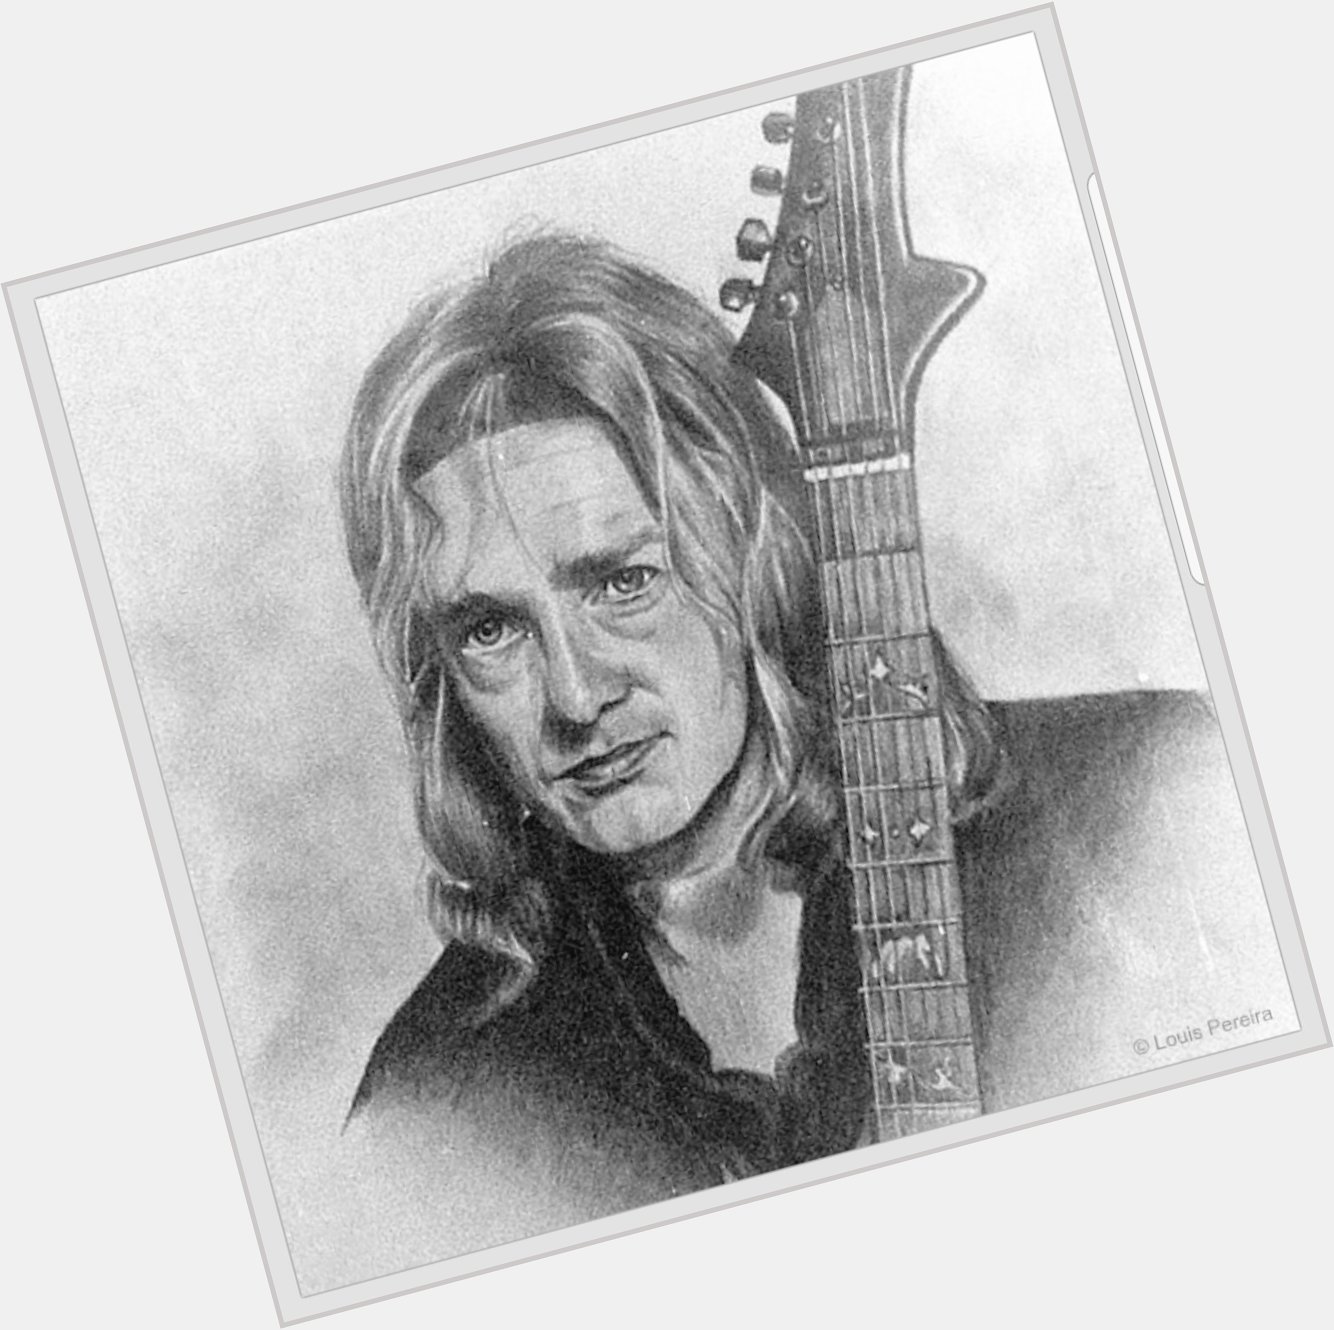  Happy 64th Birthday Adrian Smith! Here\s a pencil portrait I did of Adrian back in the mid 80s 